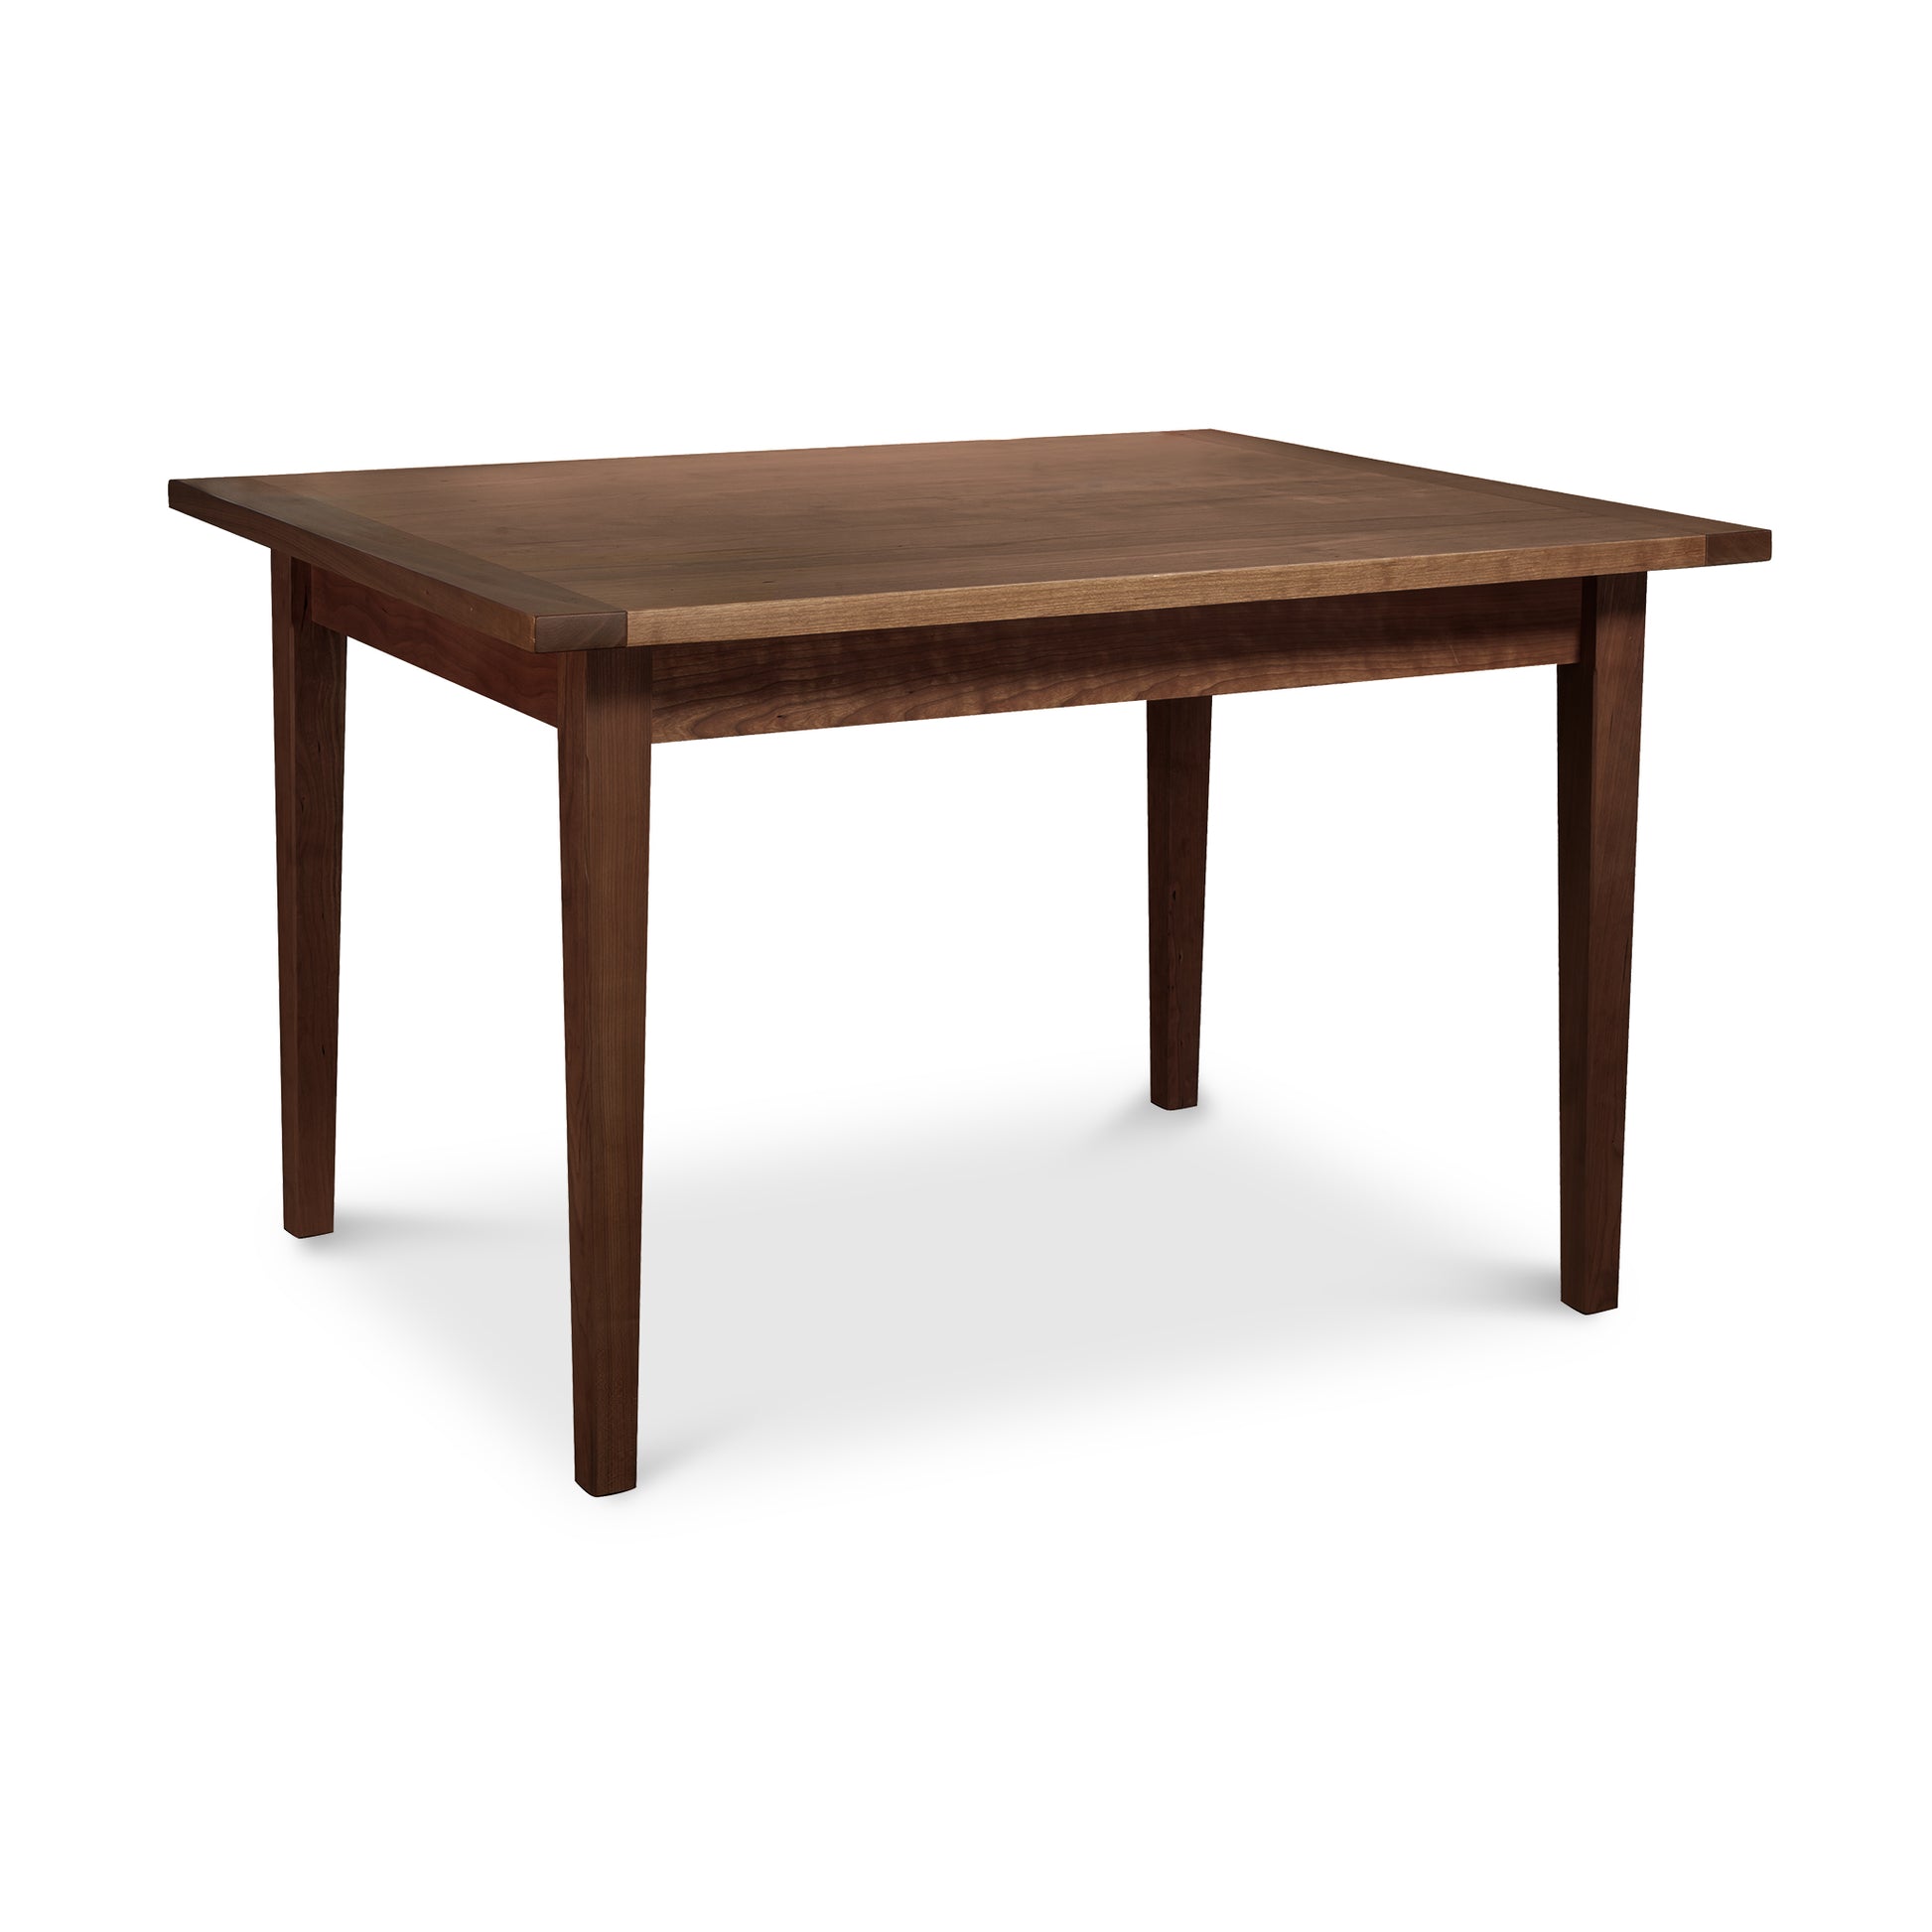 A Vermont Shaker Solid Top Harvest Table from Maple Corner Woodworks, with a flat top and four sturdy legs, isolated on a white background.